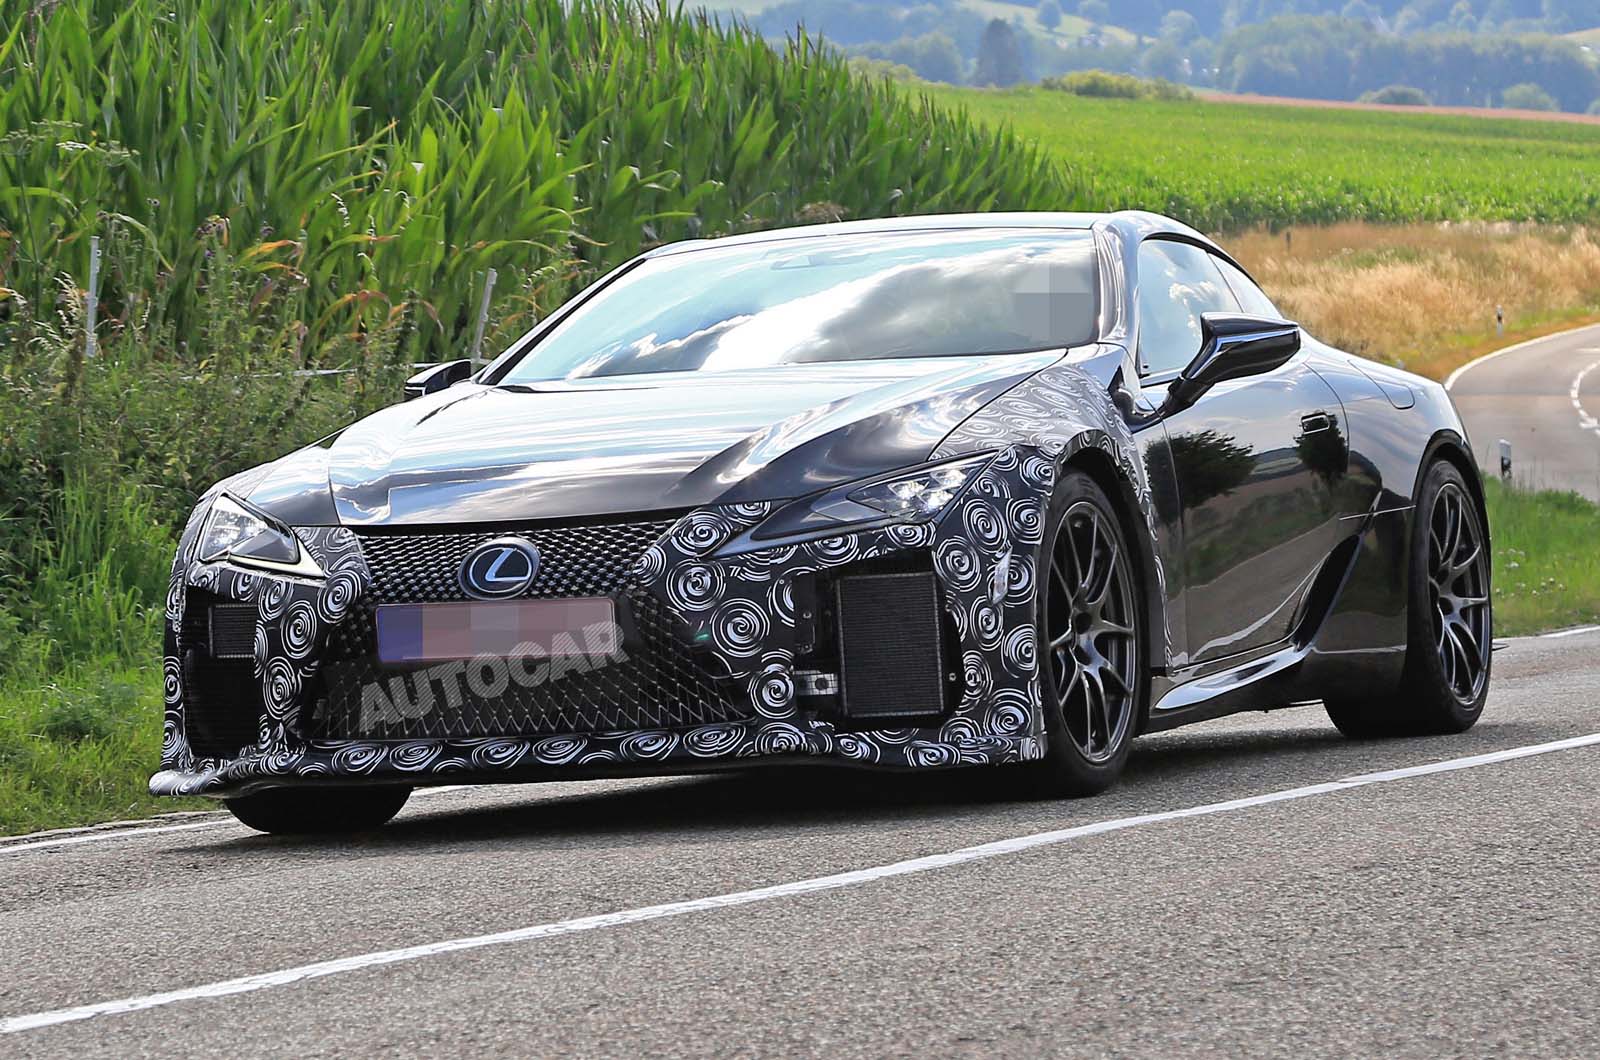 Hotter Lexus Lc F Spotted Testing For The First Time Autocar